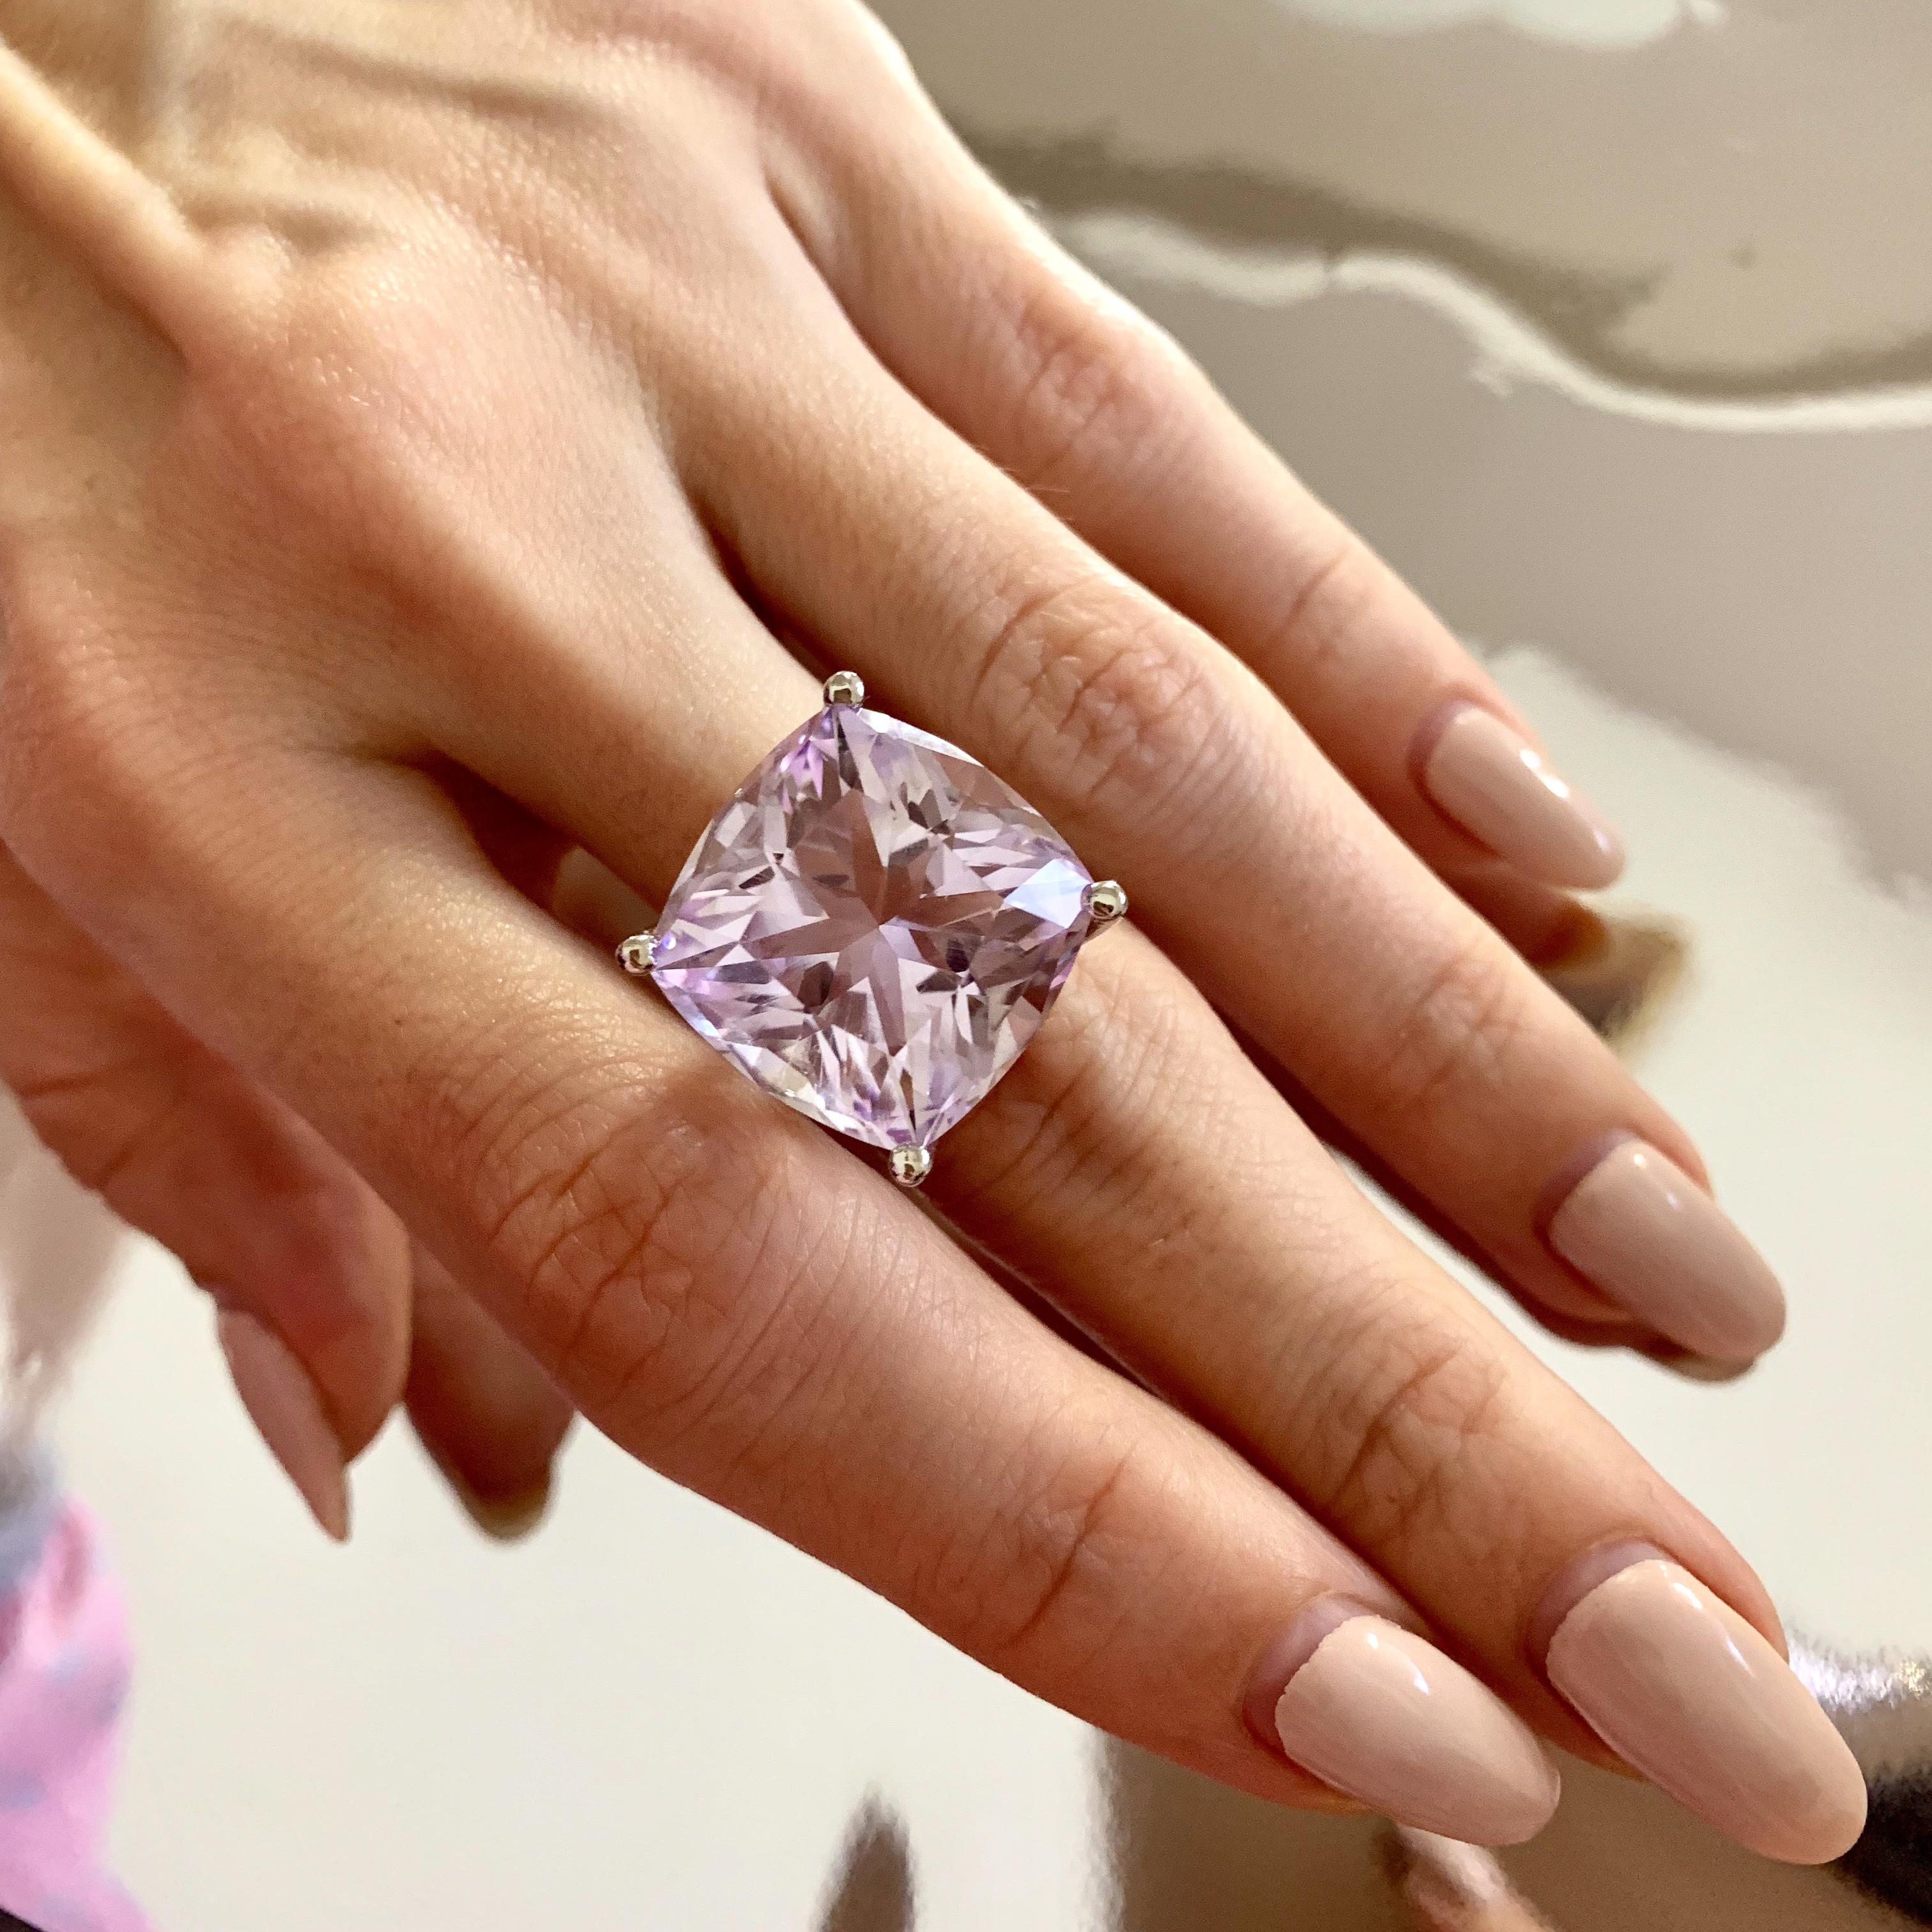 We love Amethyst Rose de France with soft pale purple color and always make jewelry with it with great pleasure. 
It is a very beautiful stone and each piece of jewelry with it becomes our favorite. 
We prefer to set this stone without side stones